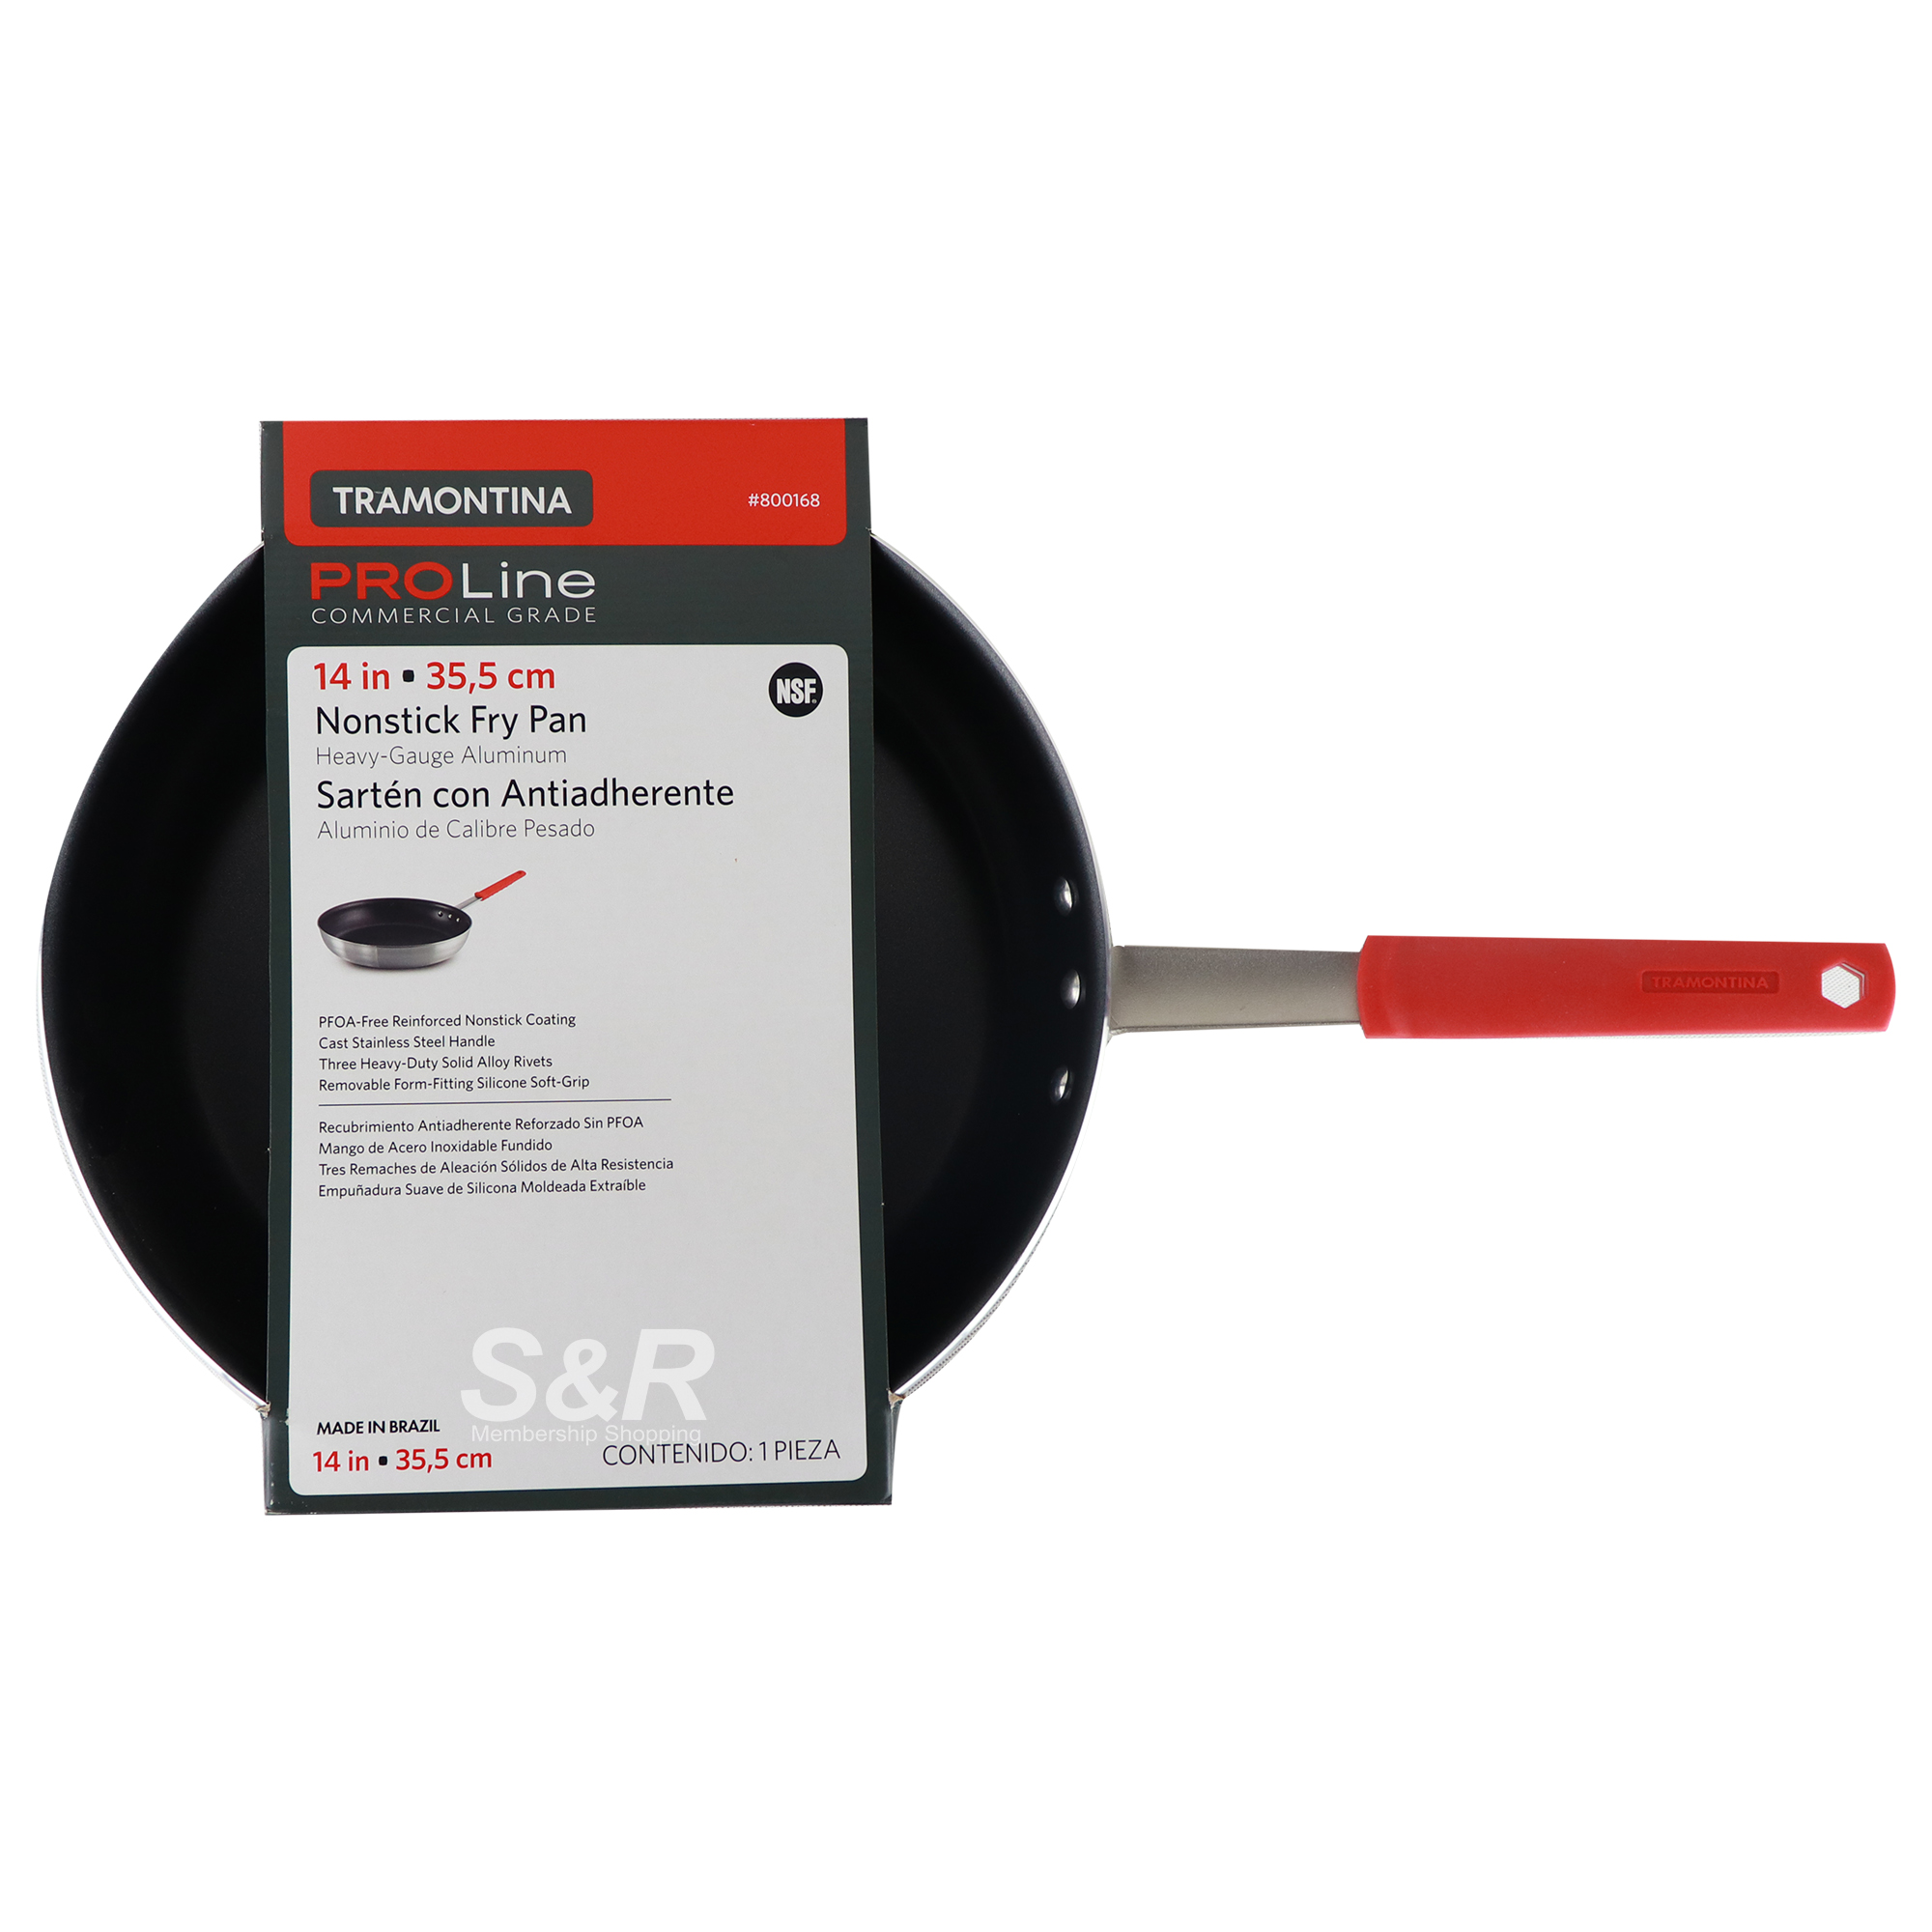 https://www.snrshopping.com/upload/product/Tramontina-ProLine-Commercial-Grade-Nonstick-Fry-Pan-1pc-4247/Tramontina%20ProLine%20Commercial%20Grade%20Nonstick%20Fry%20Pan%201pc-zZEQcTSdH6.jpg